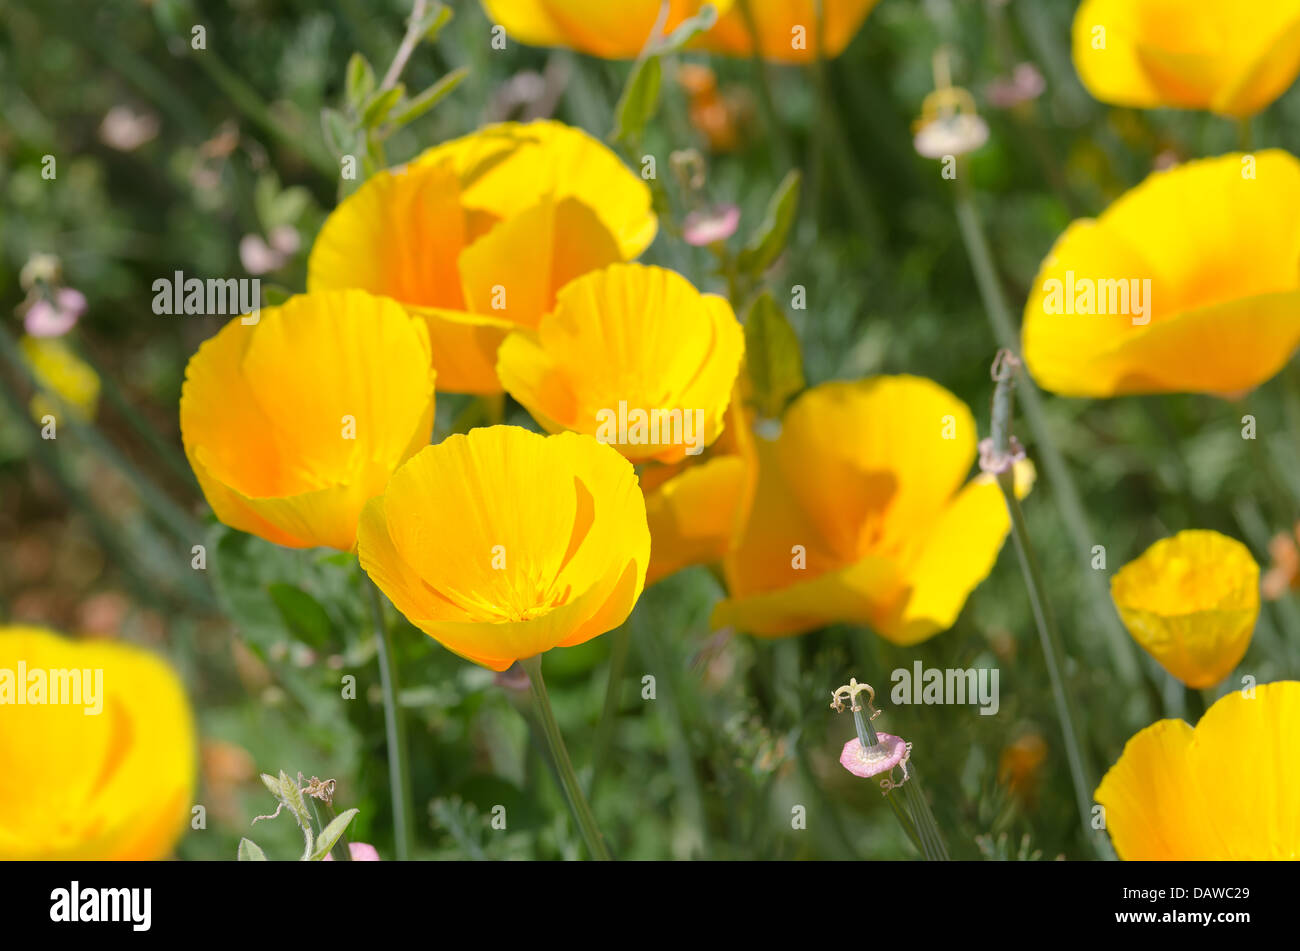 Californian poppies cups of gold in sunshine single pure tone through petals with seed pods of older flowers Stock Photo